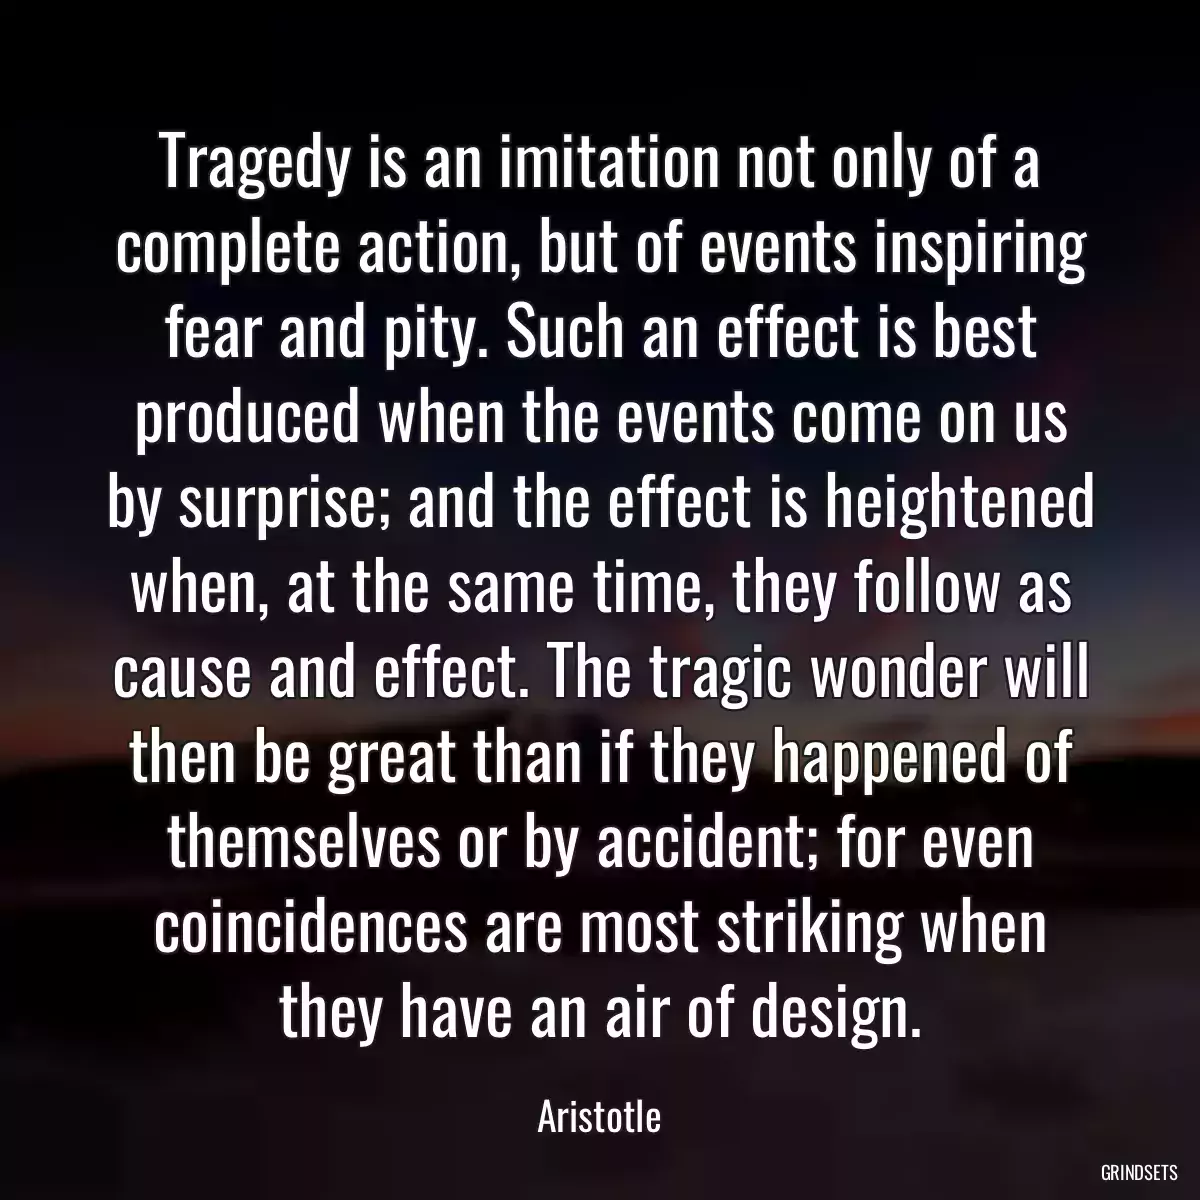 Tragedy is an imitation not only of a complete action, but of events inspiring fear and pity. Such an effect is best produced when the events come on us by surprise; and the effect is heightened when, at the same time, they follow as cause and effect. The tragic wonder will then be great than if they happened of themselves or by accident; for even coincidences are most striking when they have an air of design.